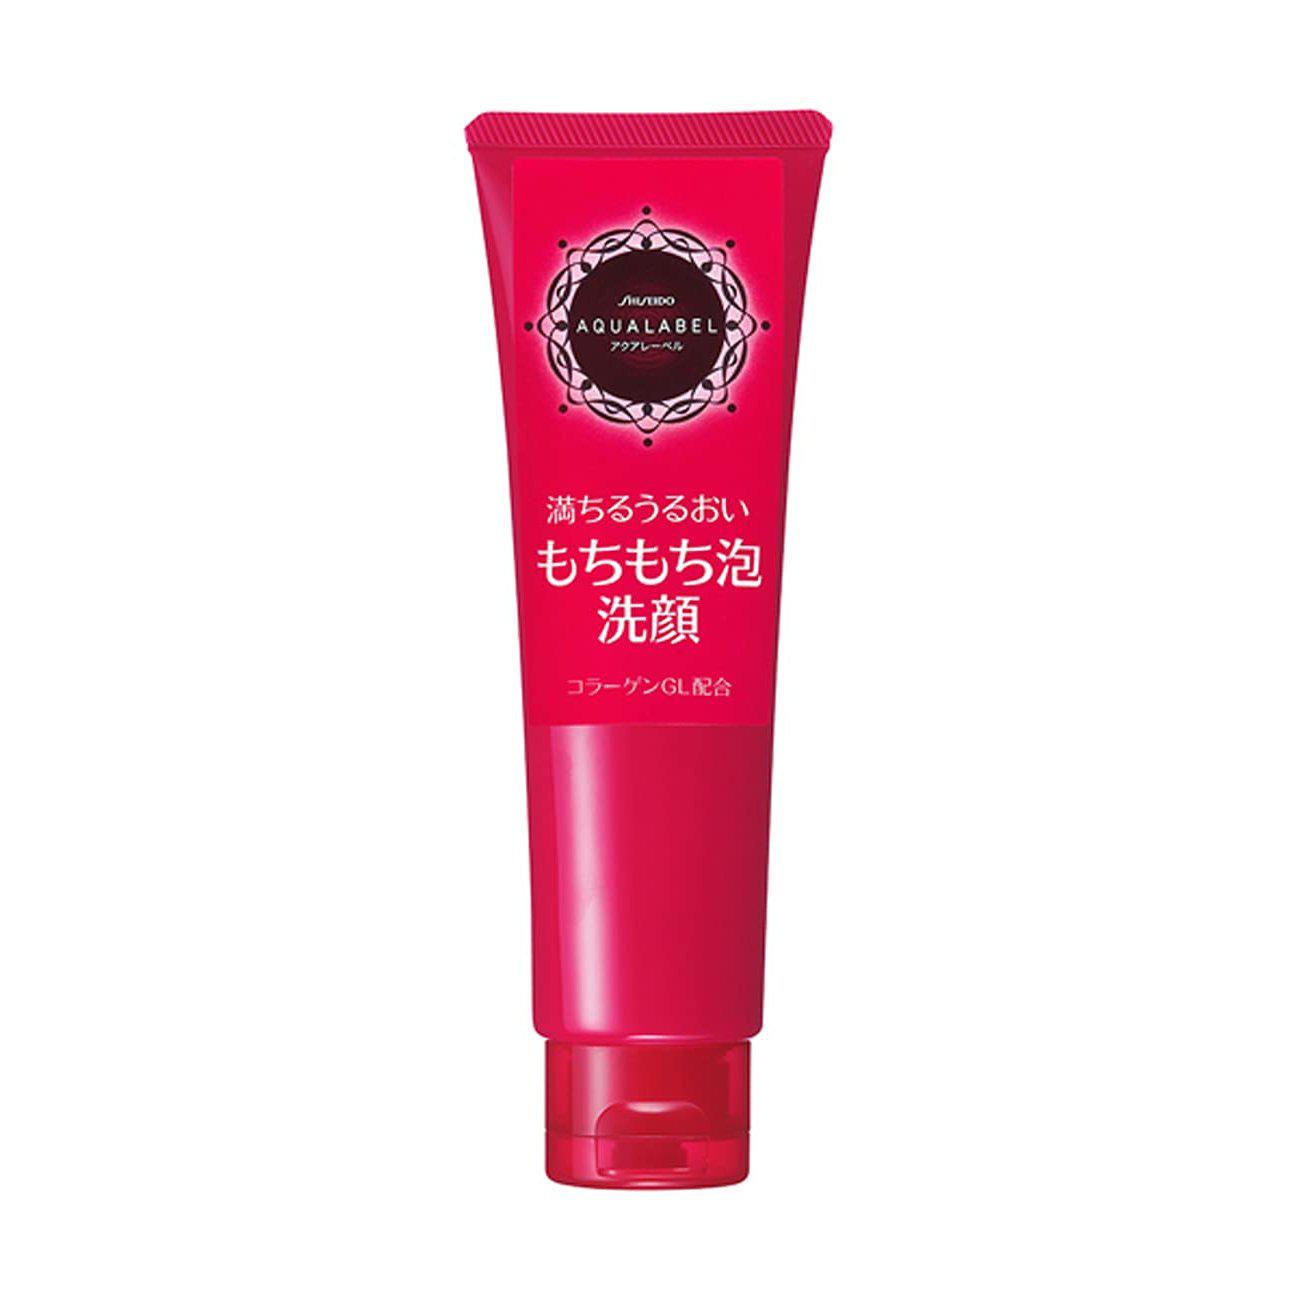 Shiseido Aqualabel Milky Mousse Foam Facial Cleanser For Clogged Pores 130g